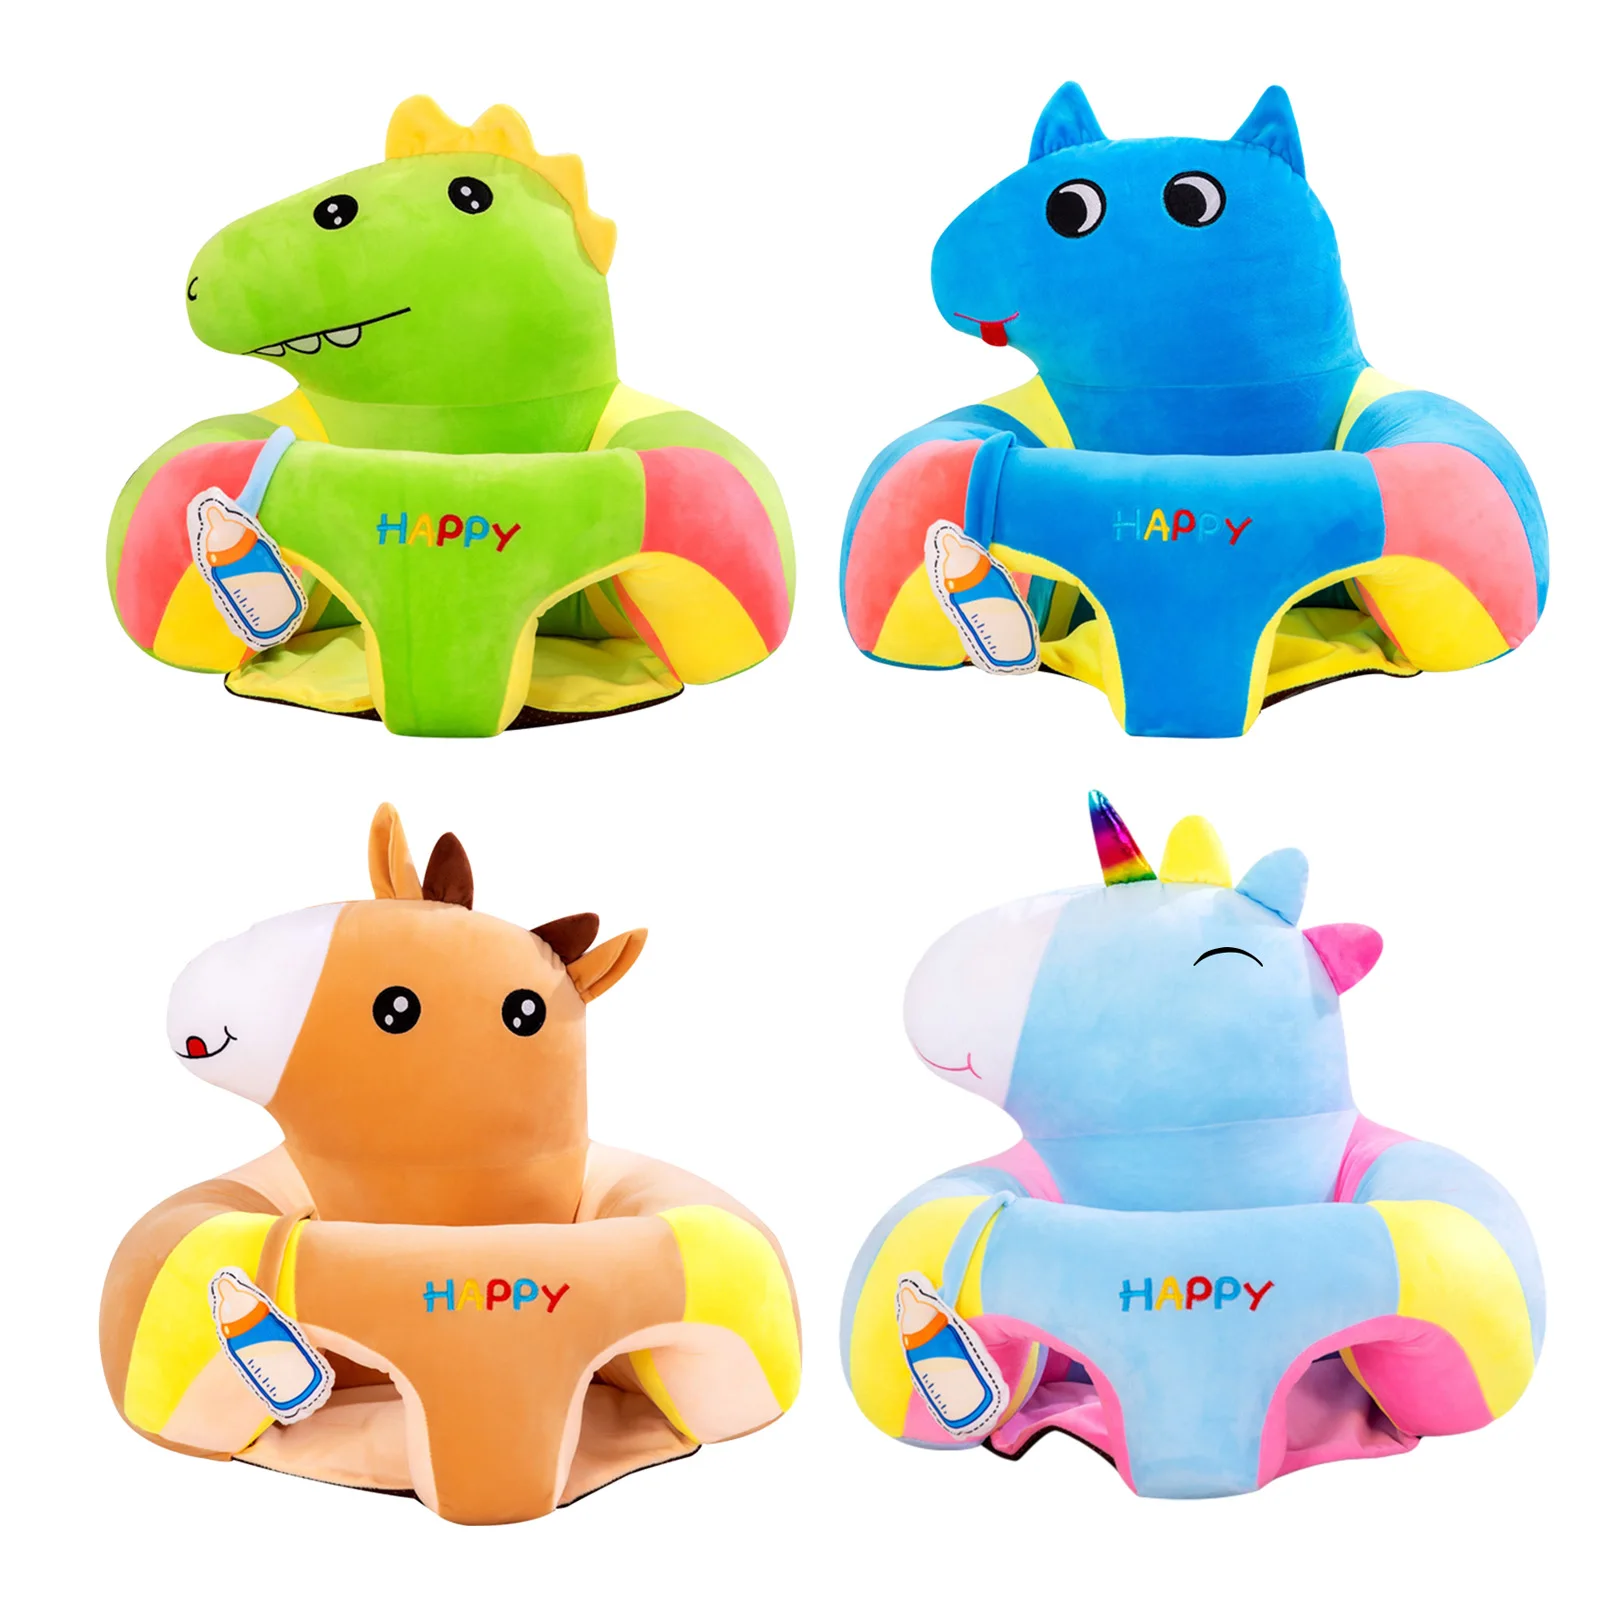 

Baby Sofa Infant Support Seat Soft Animal Shaped Learn Sit Chair Soft Animal-shaped Plush Floor Seat Suitable For Babies To Play